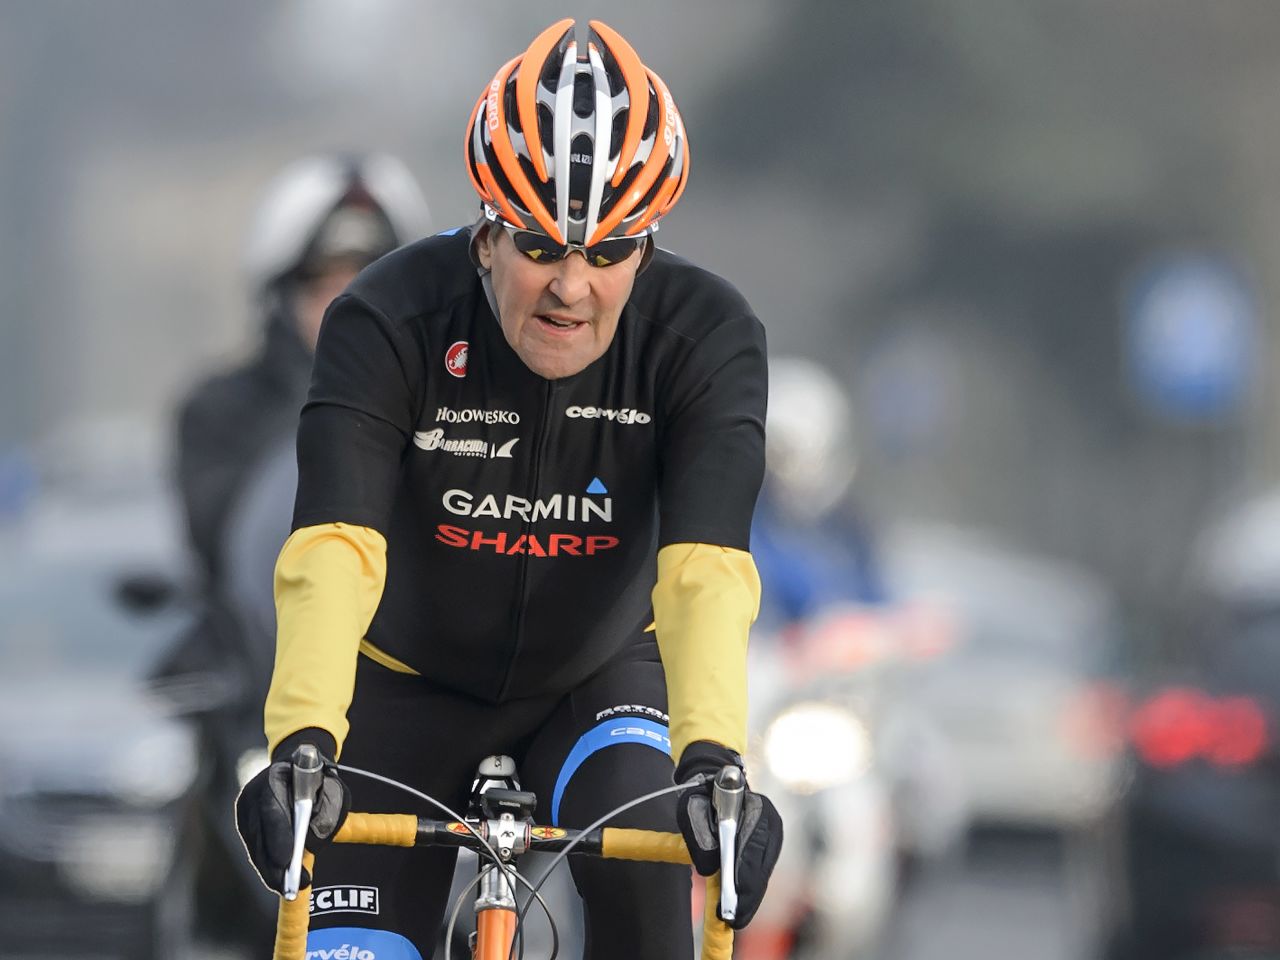 Kerry rides his bike on March 16, during a break in talks  in Lausanne, Switzerland, about Iran's nuclear program.